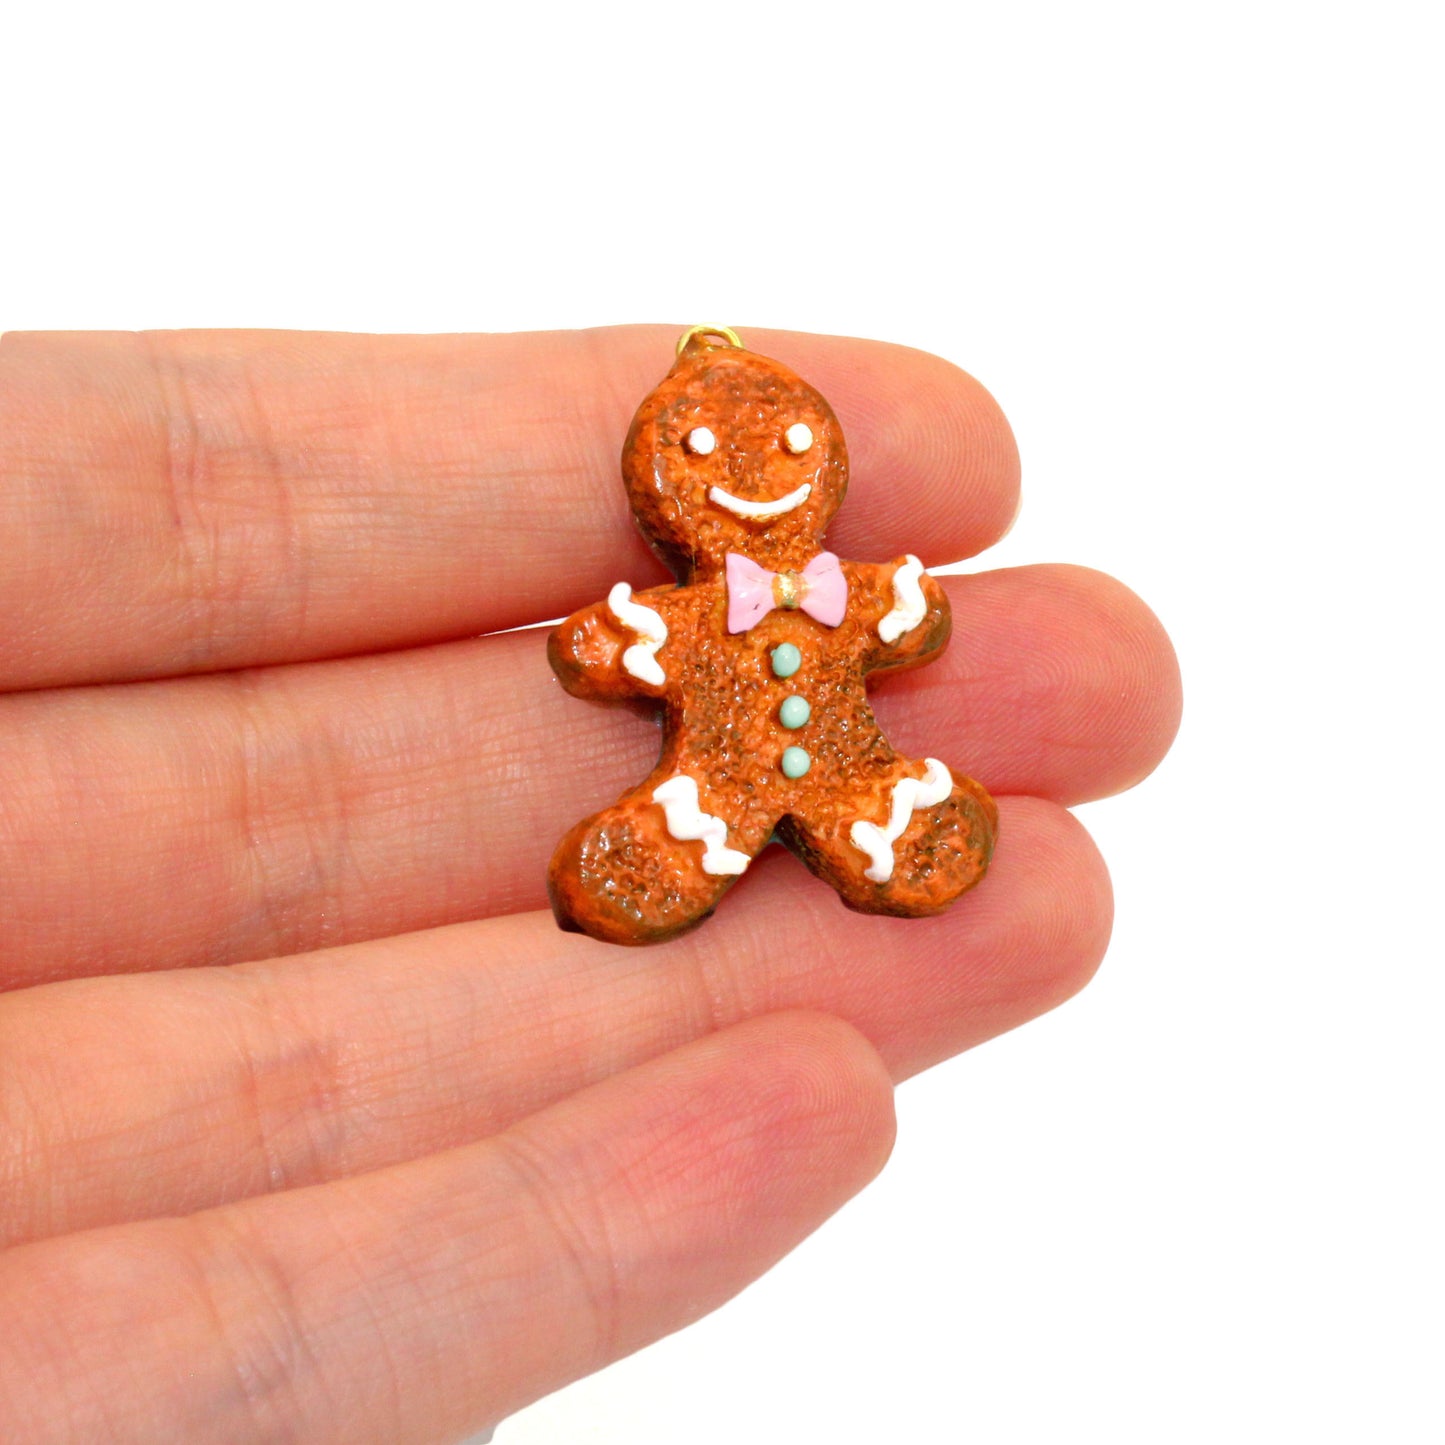 Gingerbread Man Cookie Necklace - Silver or Gold - Limited Edition Holiday Collection